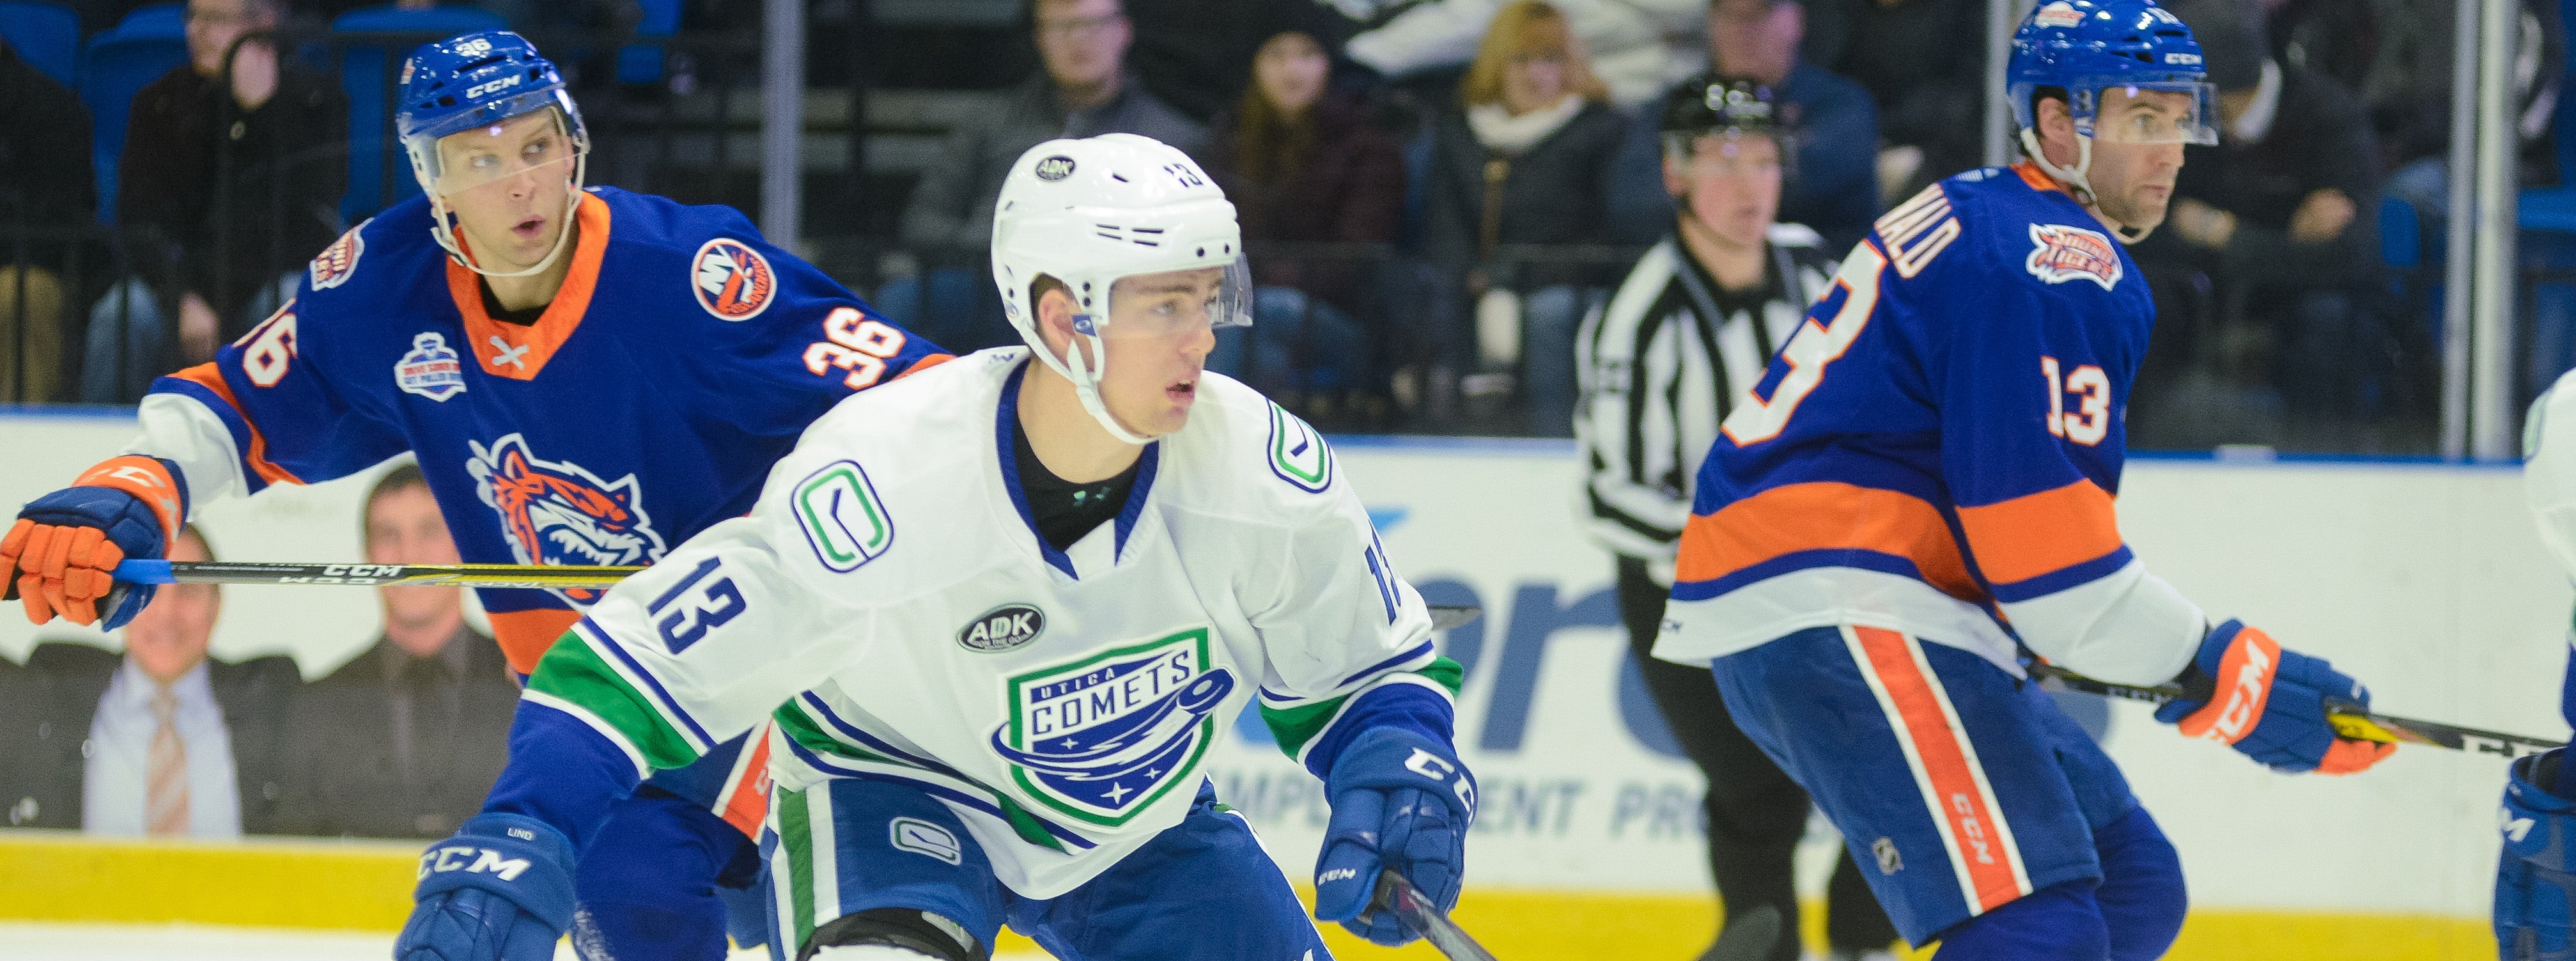 COMETS CAN'T OVERCOME SLOW START IN LOSS TO BRIDGEPORT